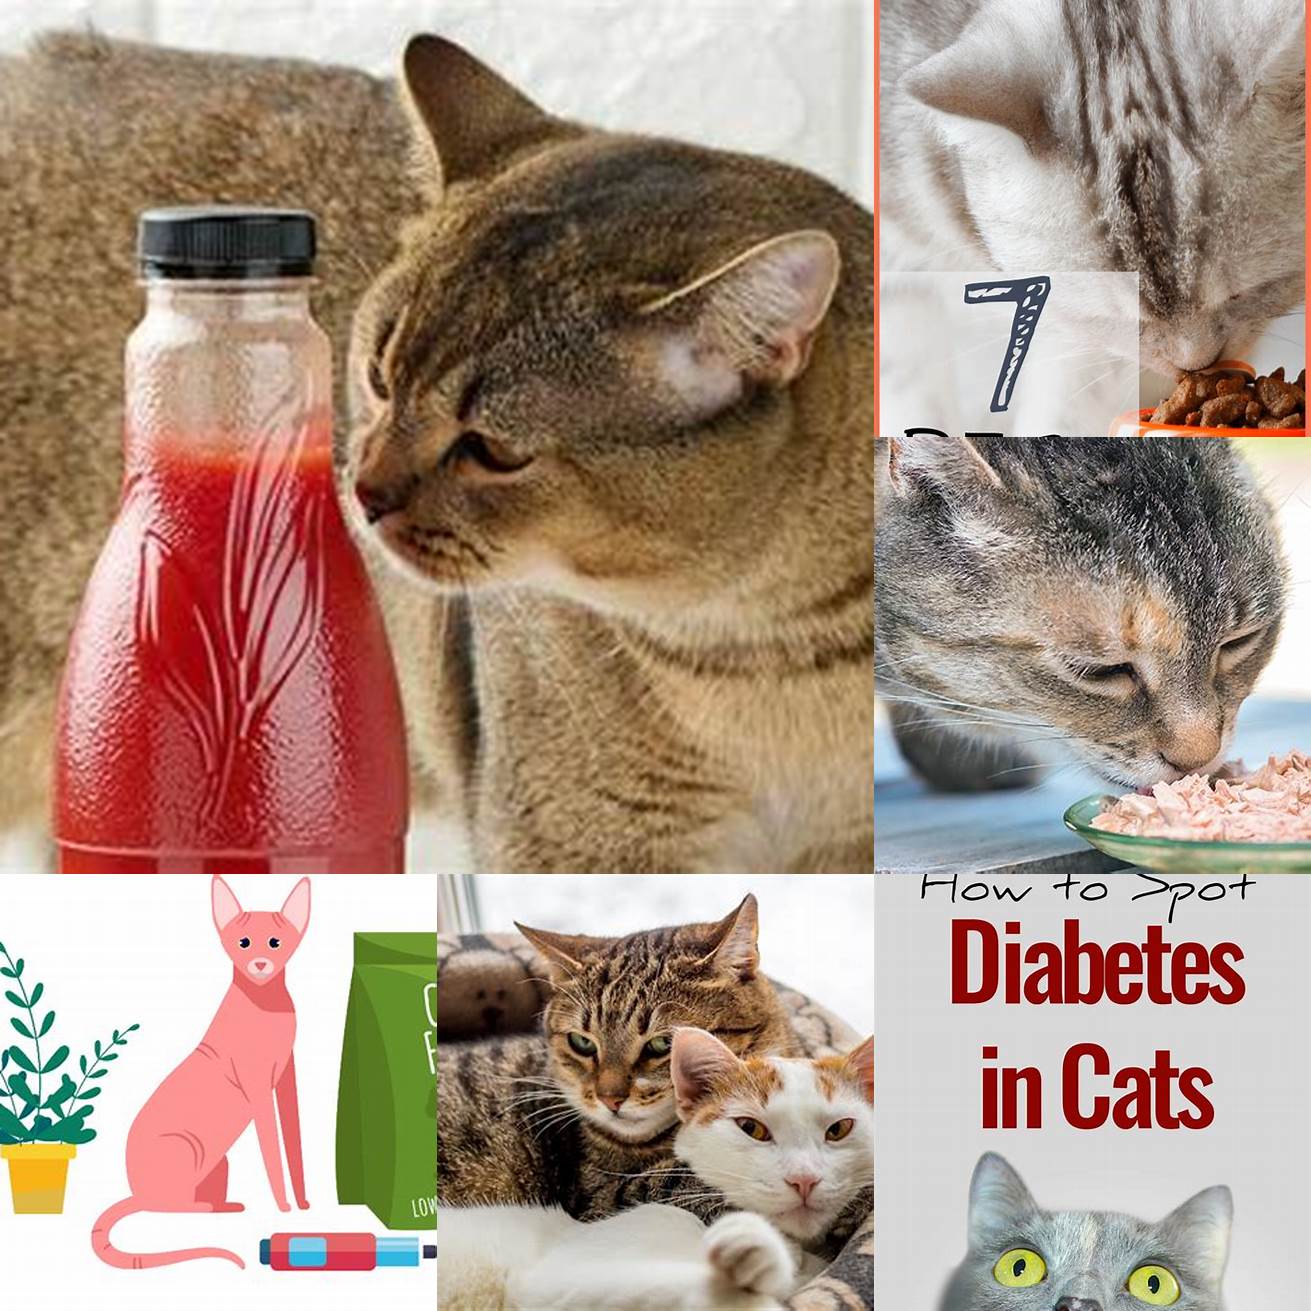 Diabetes Feeding ketchup to cats can increase their risk of developing diabetes due to the high sugar content